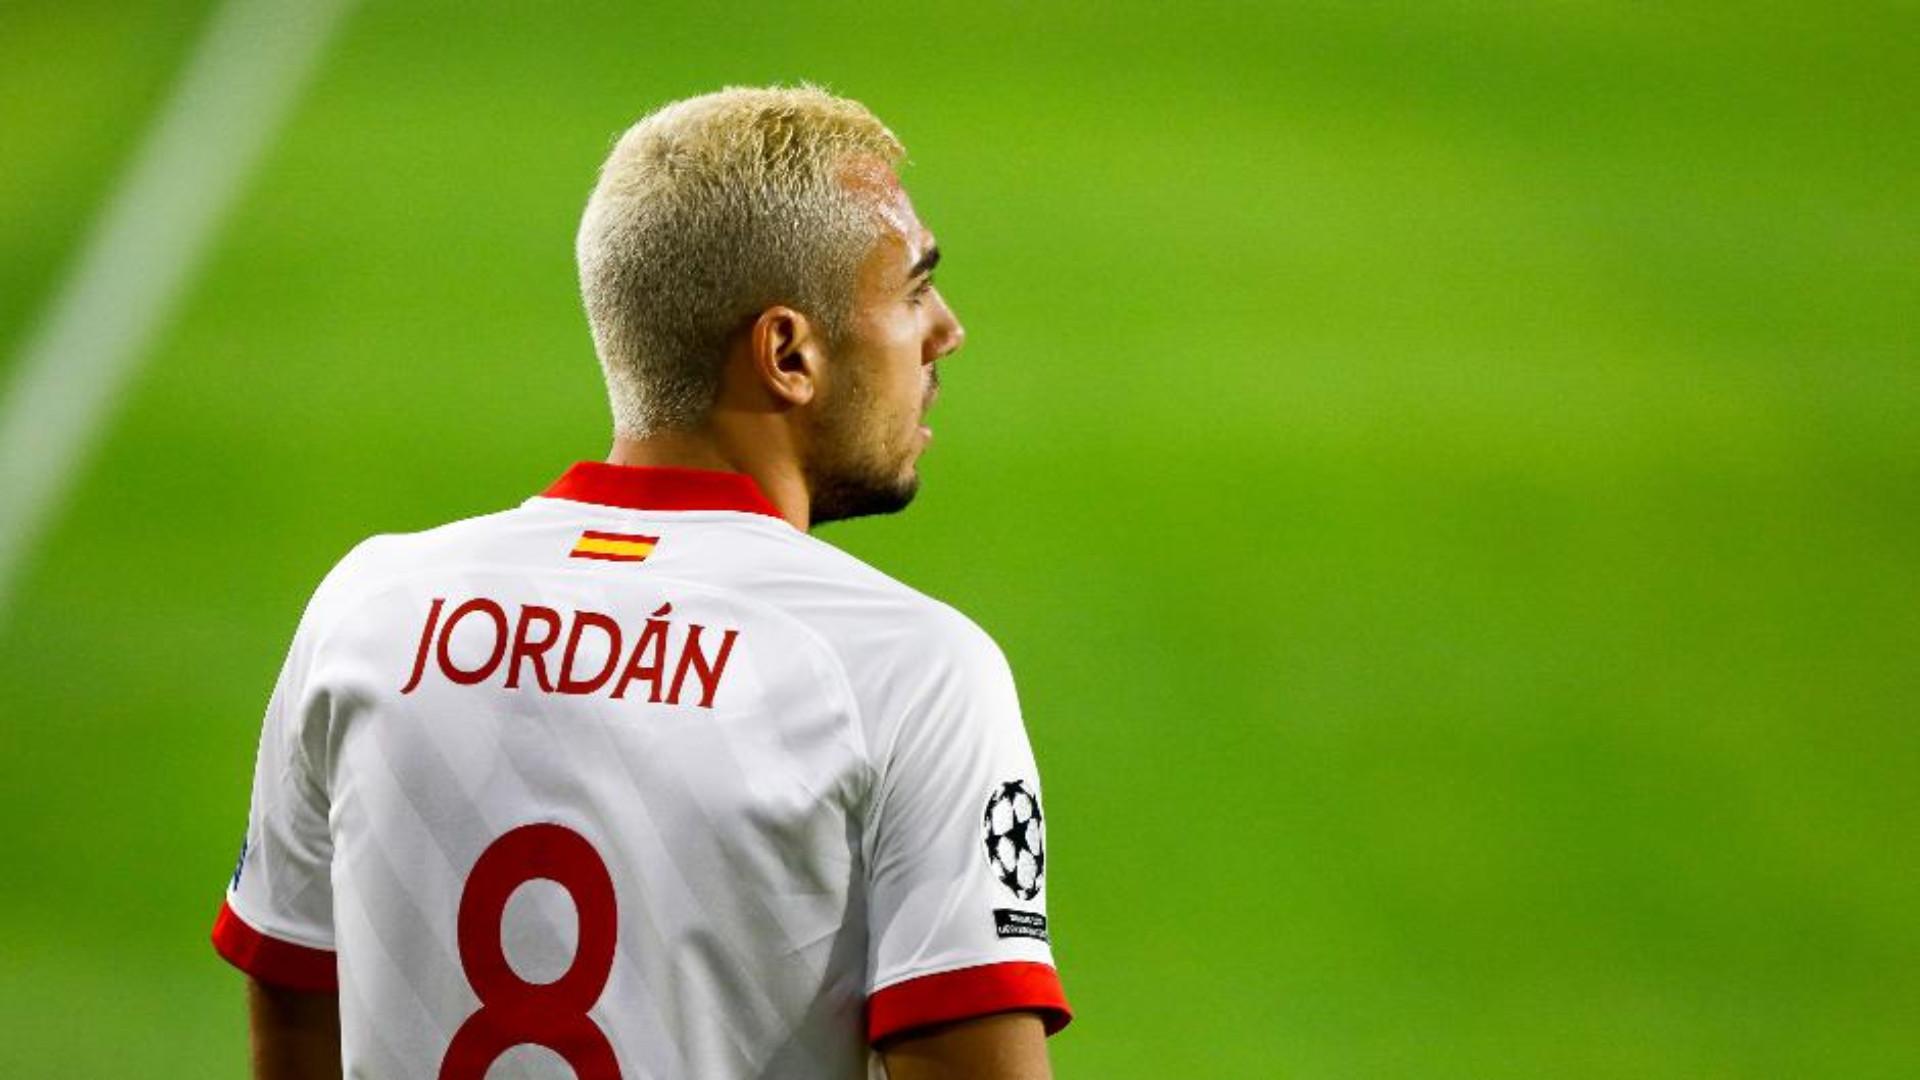 Joan Jordan is considered one of the most important players in the Sevilla squad. (Image Credit: Twitter)